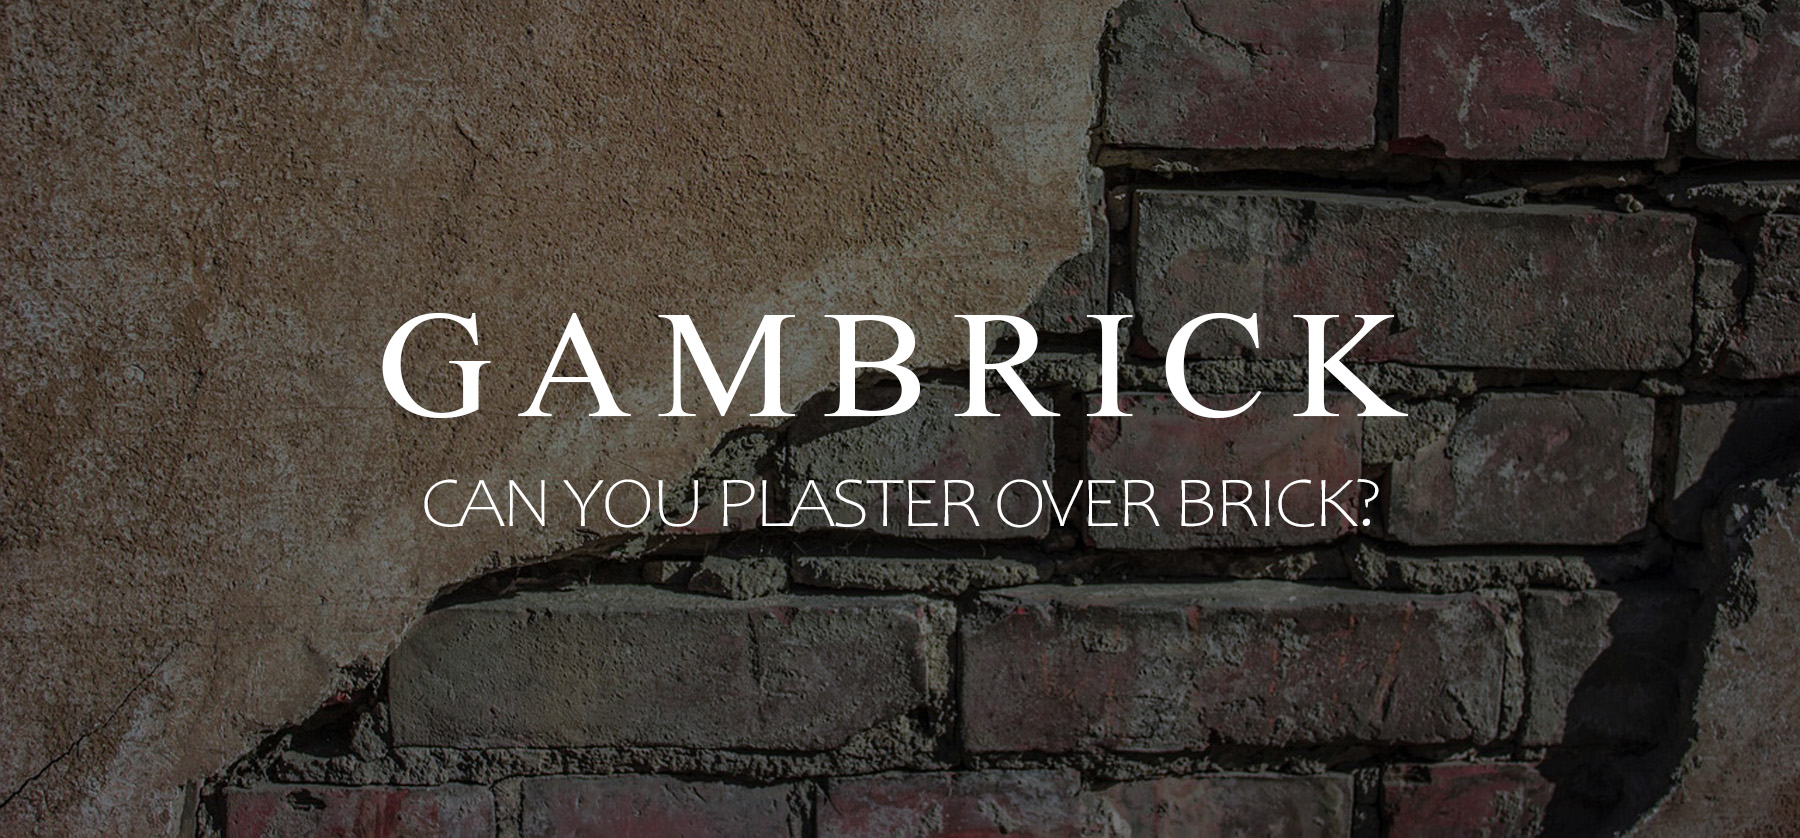 can you plaster over brick banner 1.0